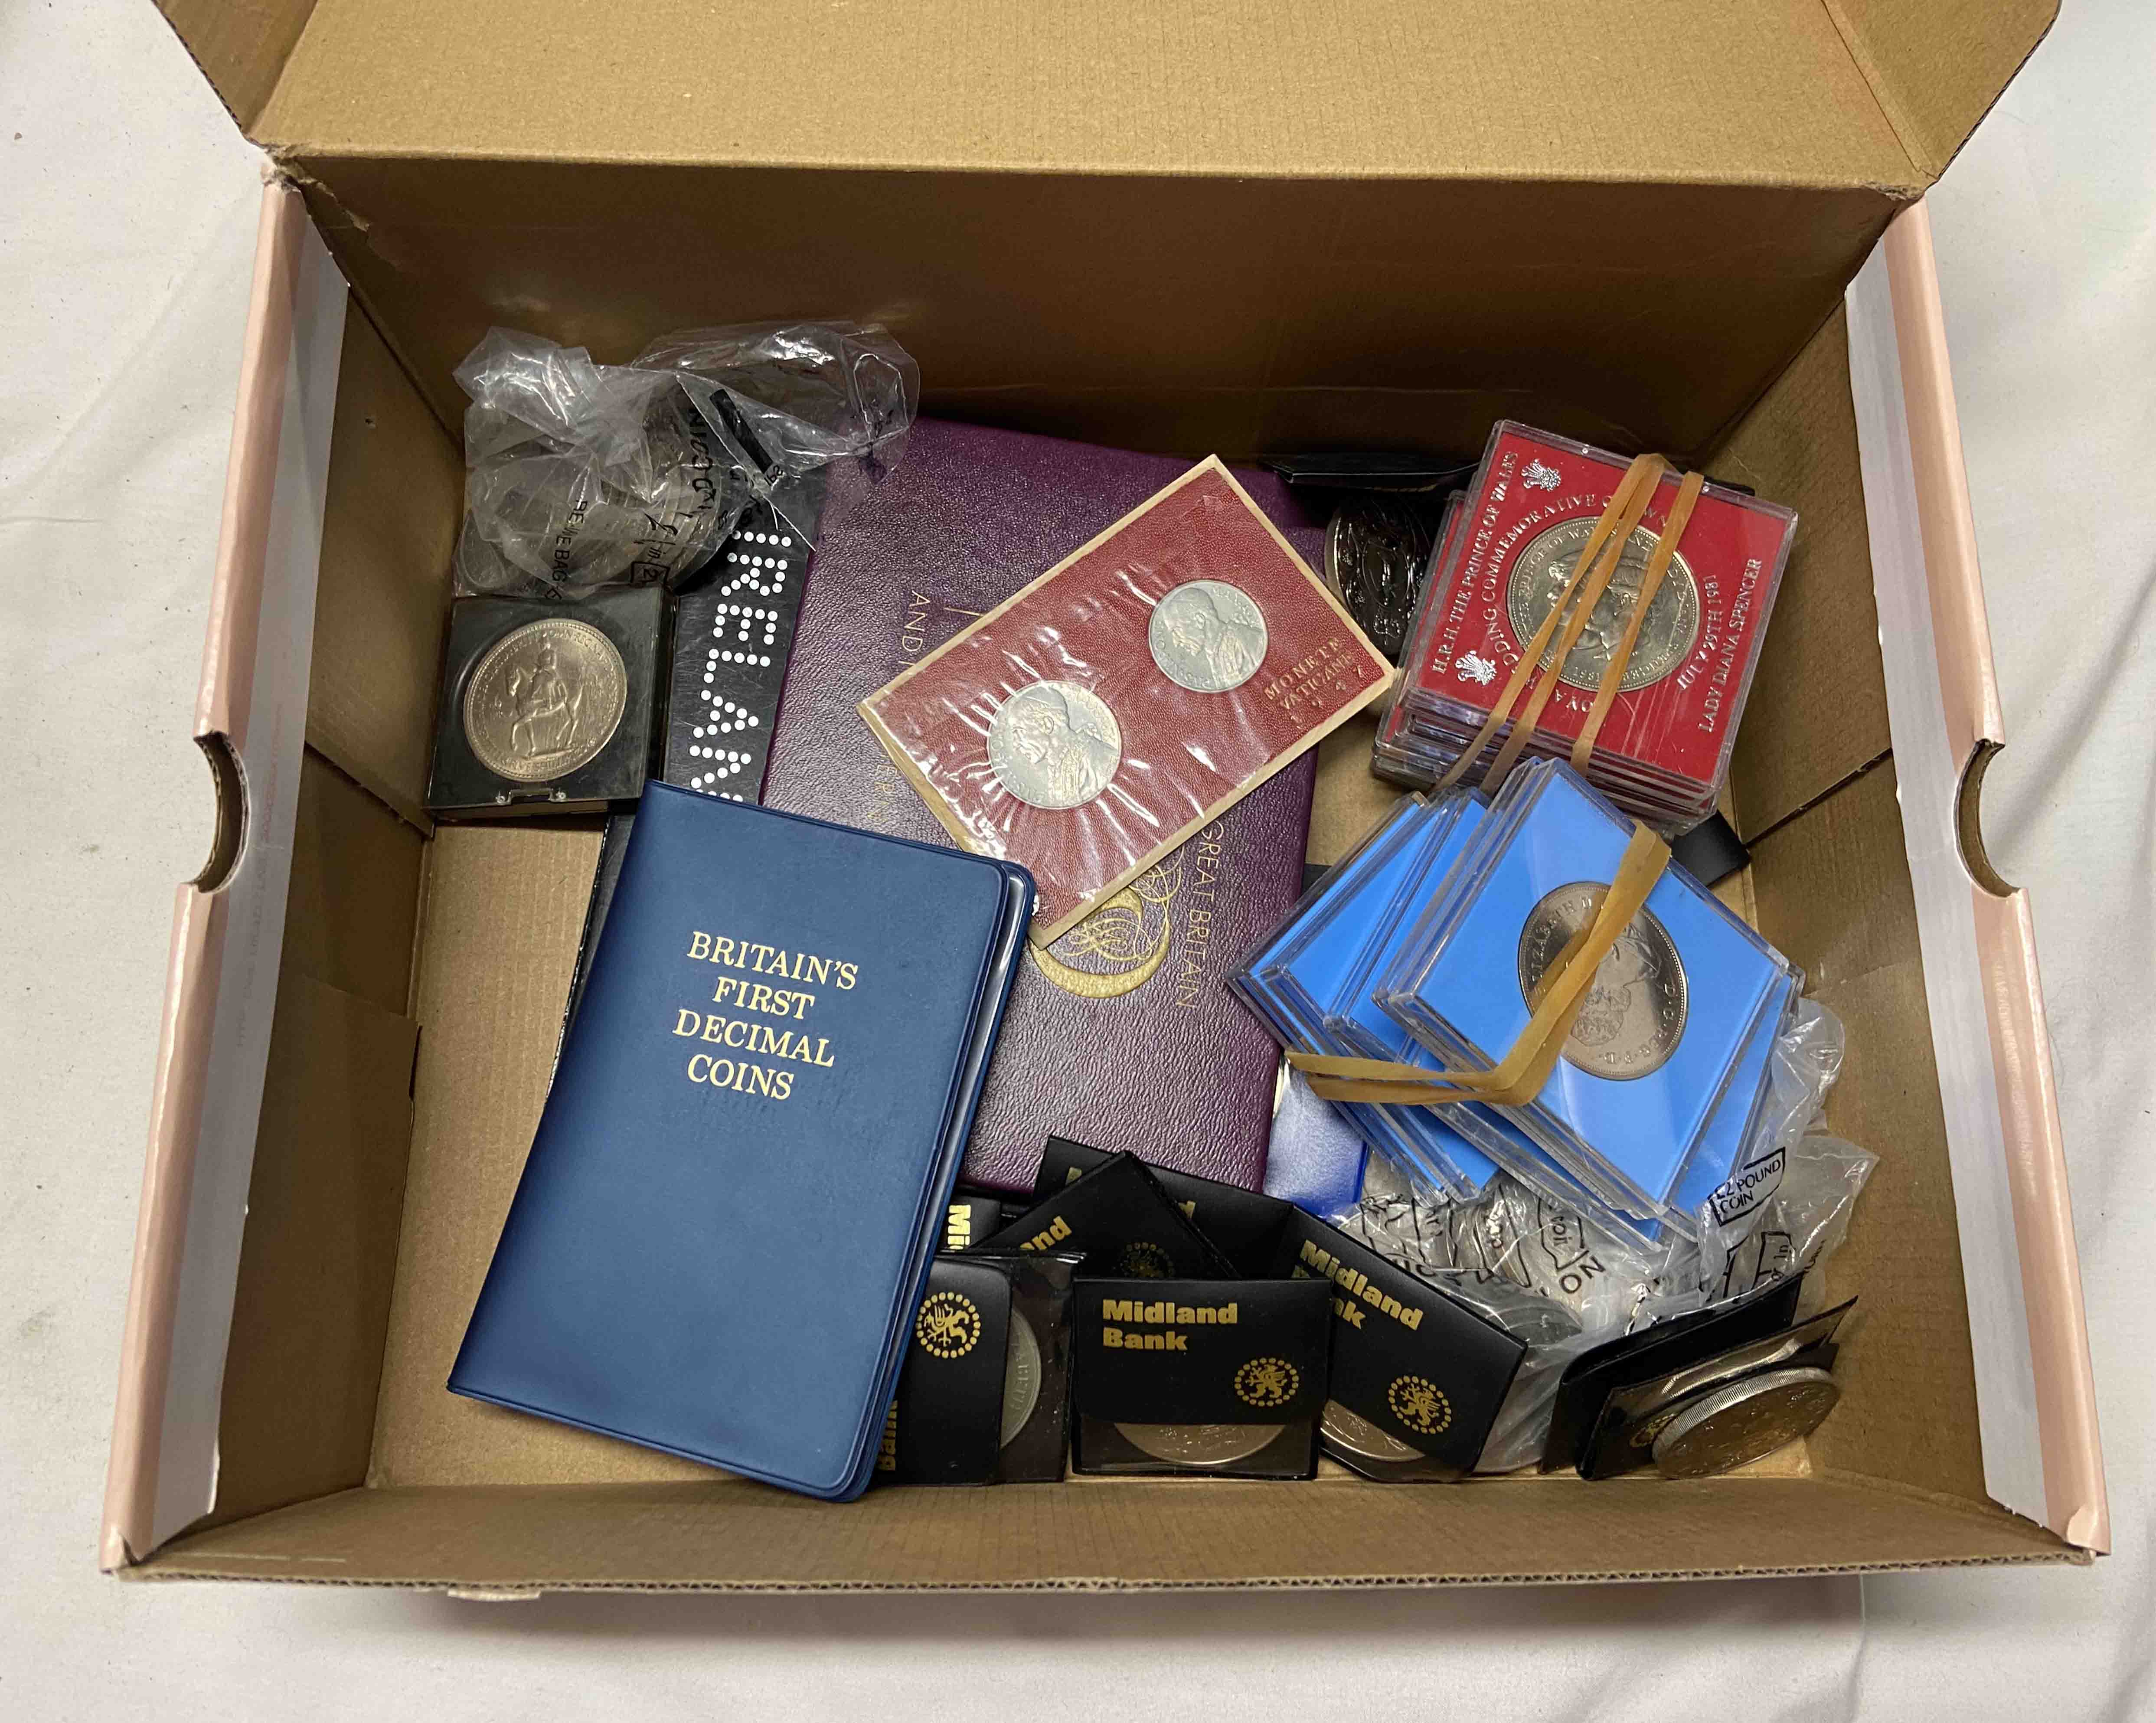 A box containing GB coinage, 1970/71 coin sets, modern Crowns and bag of collectors' 50p coins